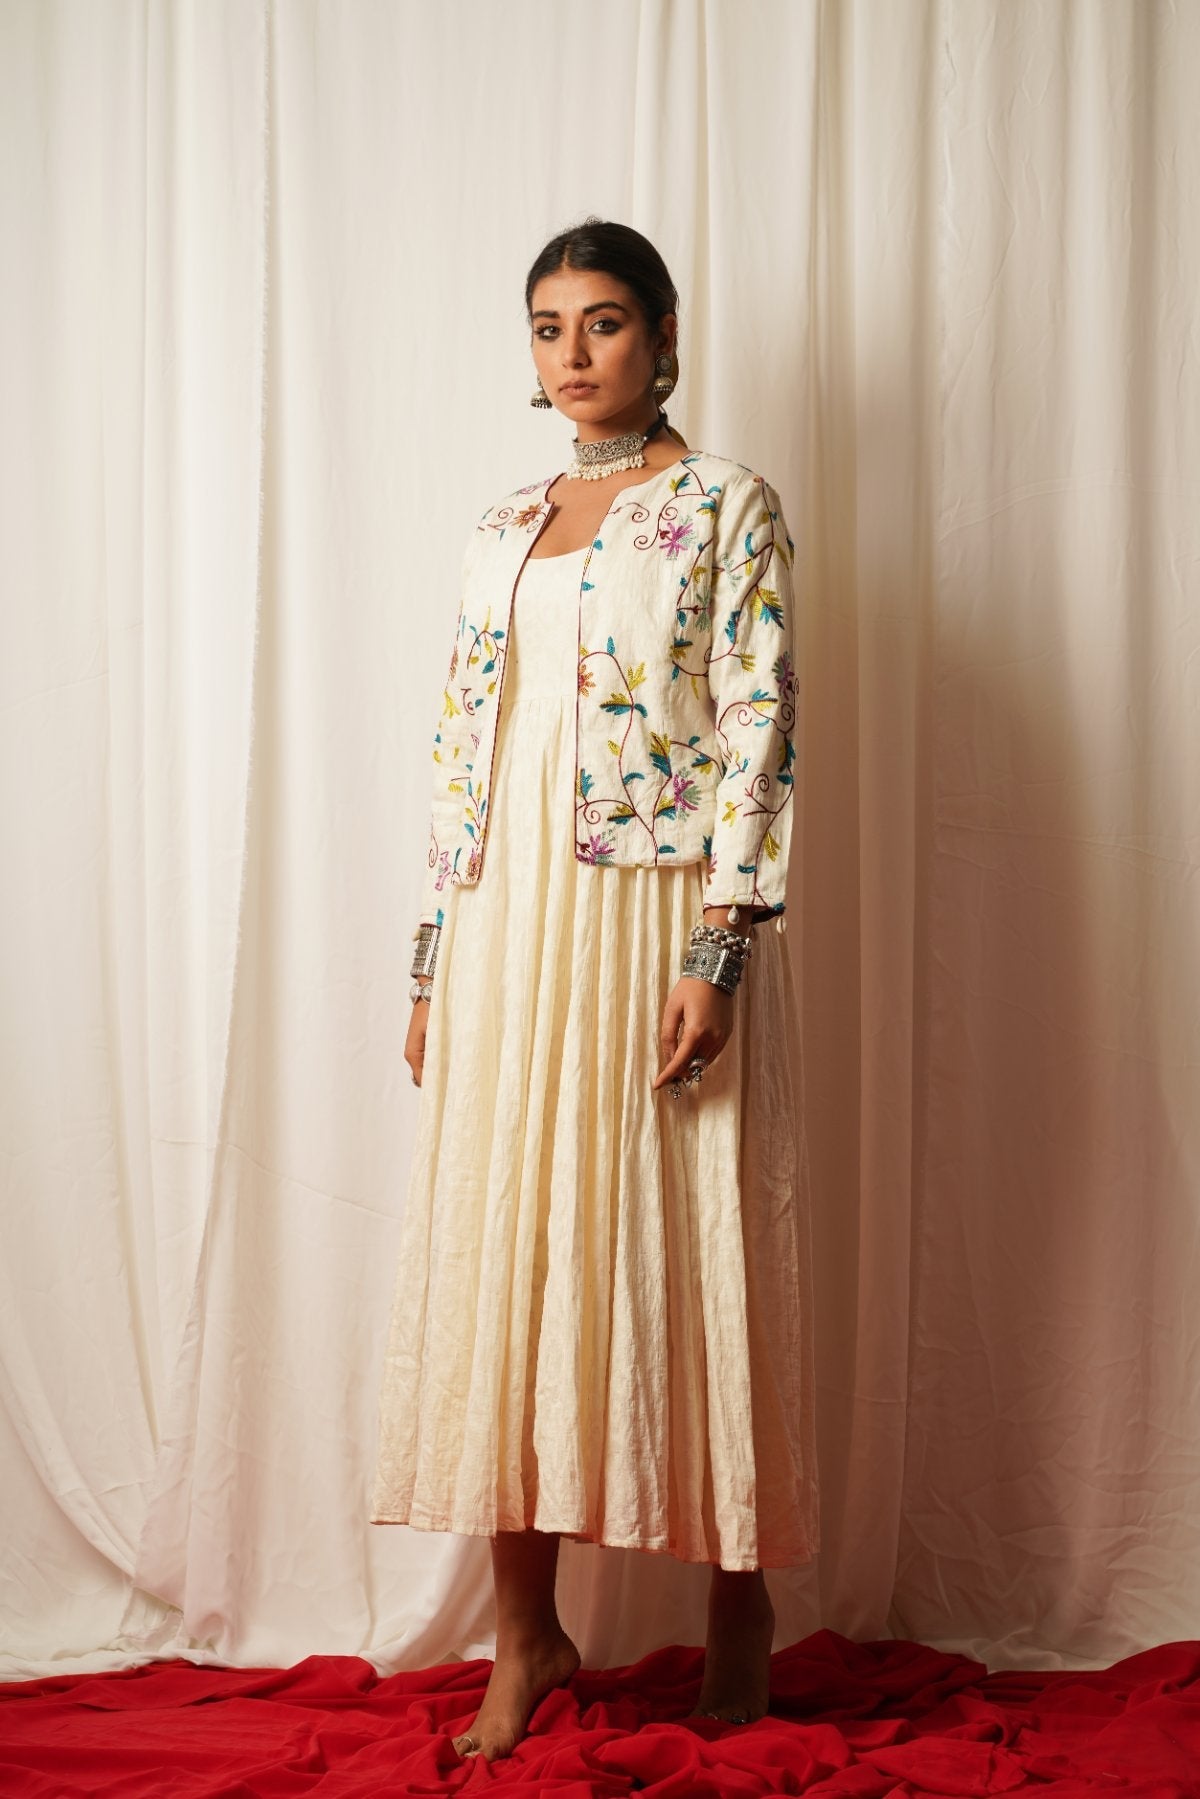 Dress And Jacket - Set Of Two at Kamakhyaa by Keva. This item is Co-ord Sets, Cotton Lurex, Dress Sets, Embroidered, Jackets, Midi Dresses, Natural, Relaxed Fit, Resort Wear, Tatriz, White, Womenswear